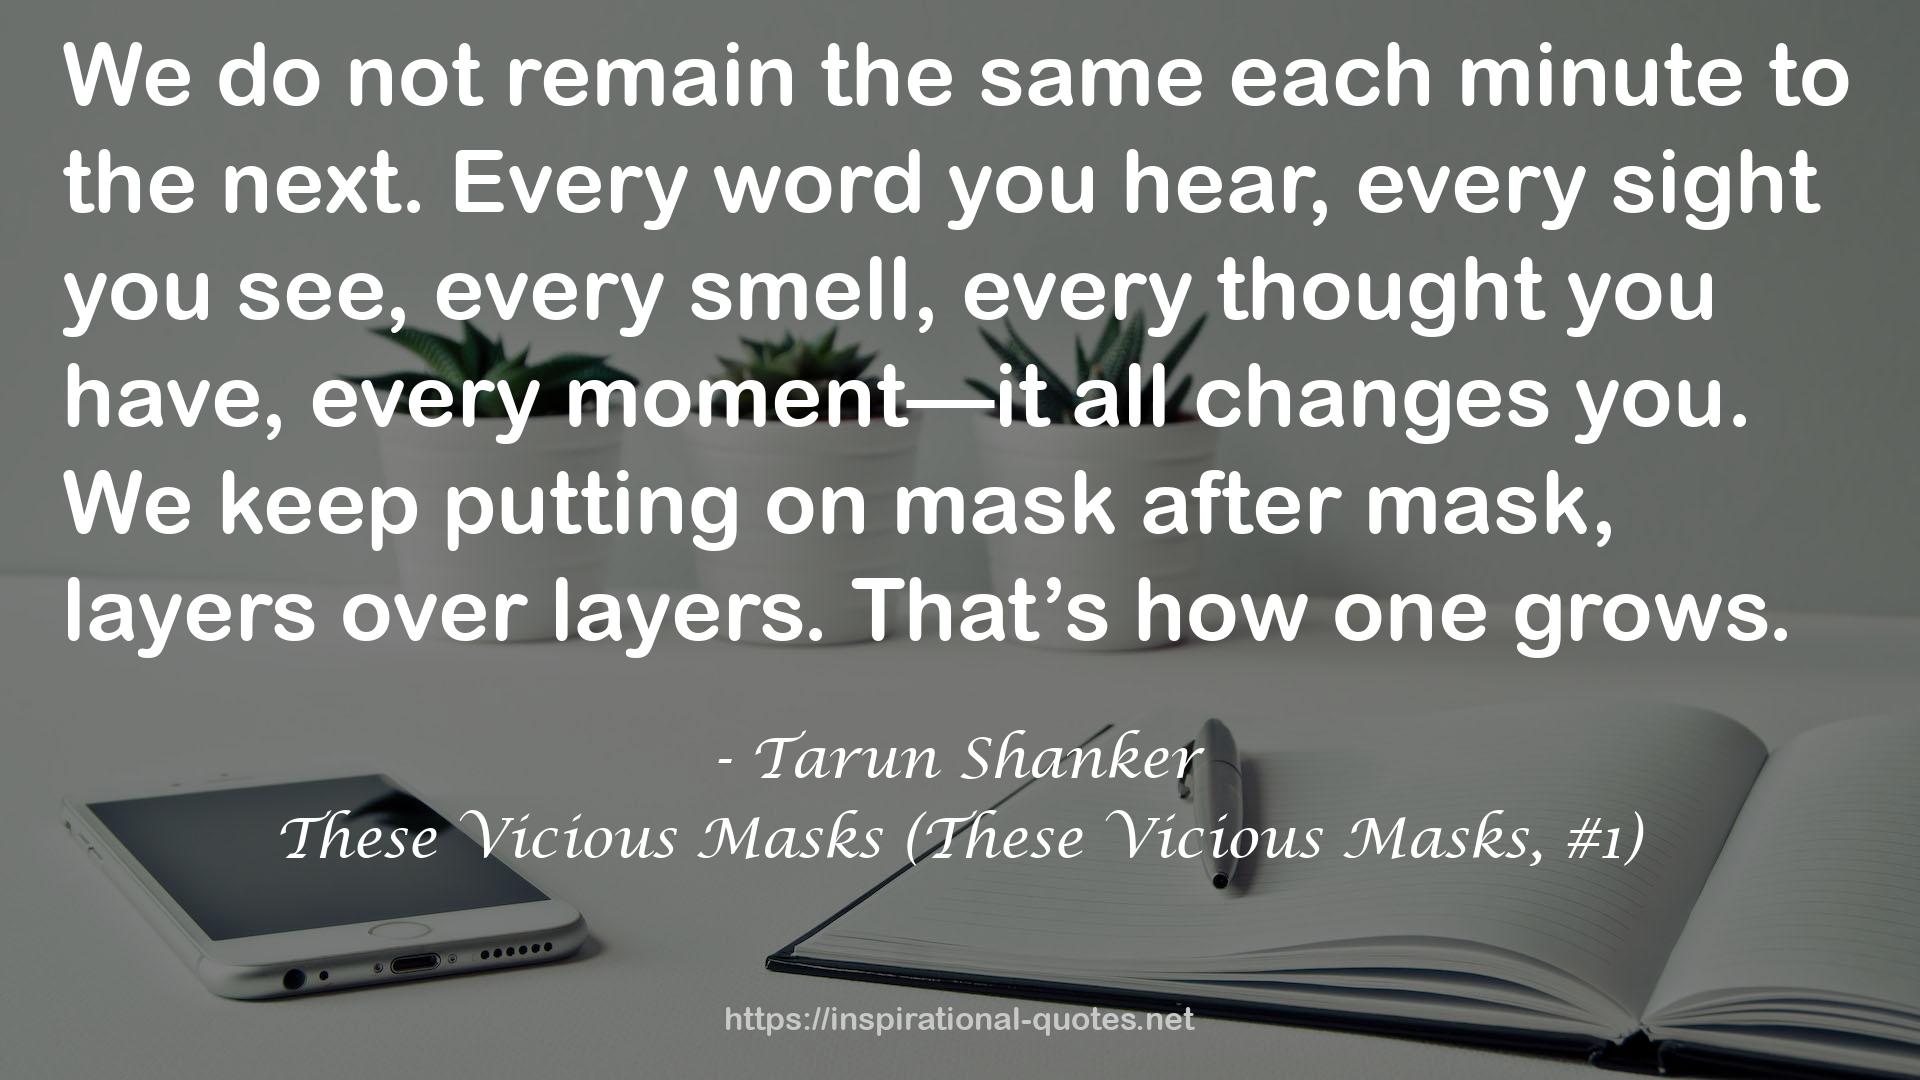 These Vicious Masks (These Vicious Masks, #1) QUOTES